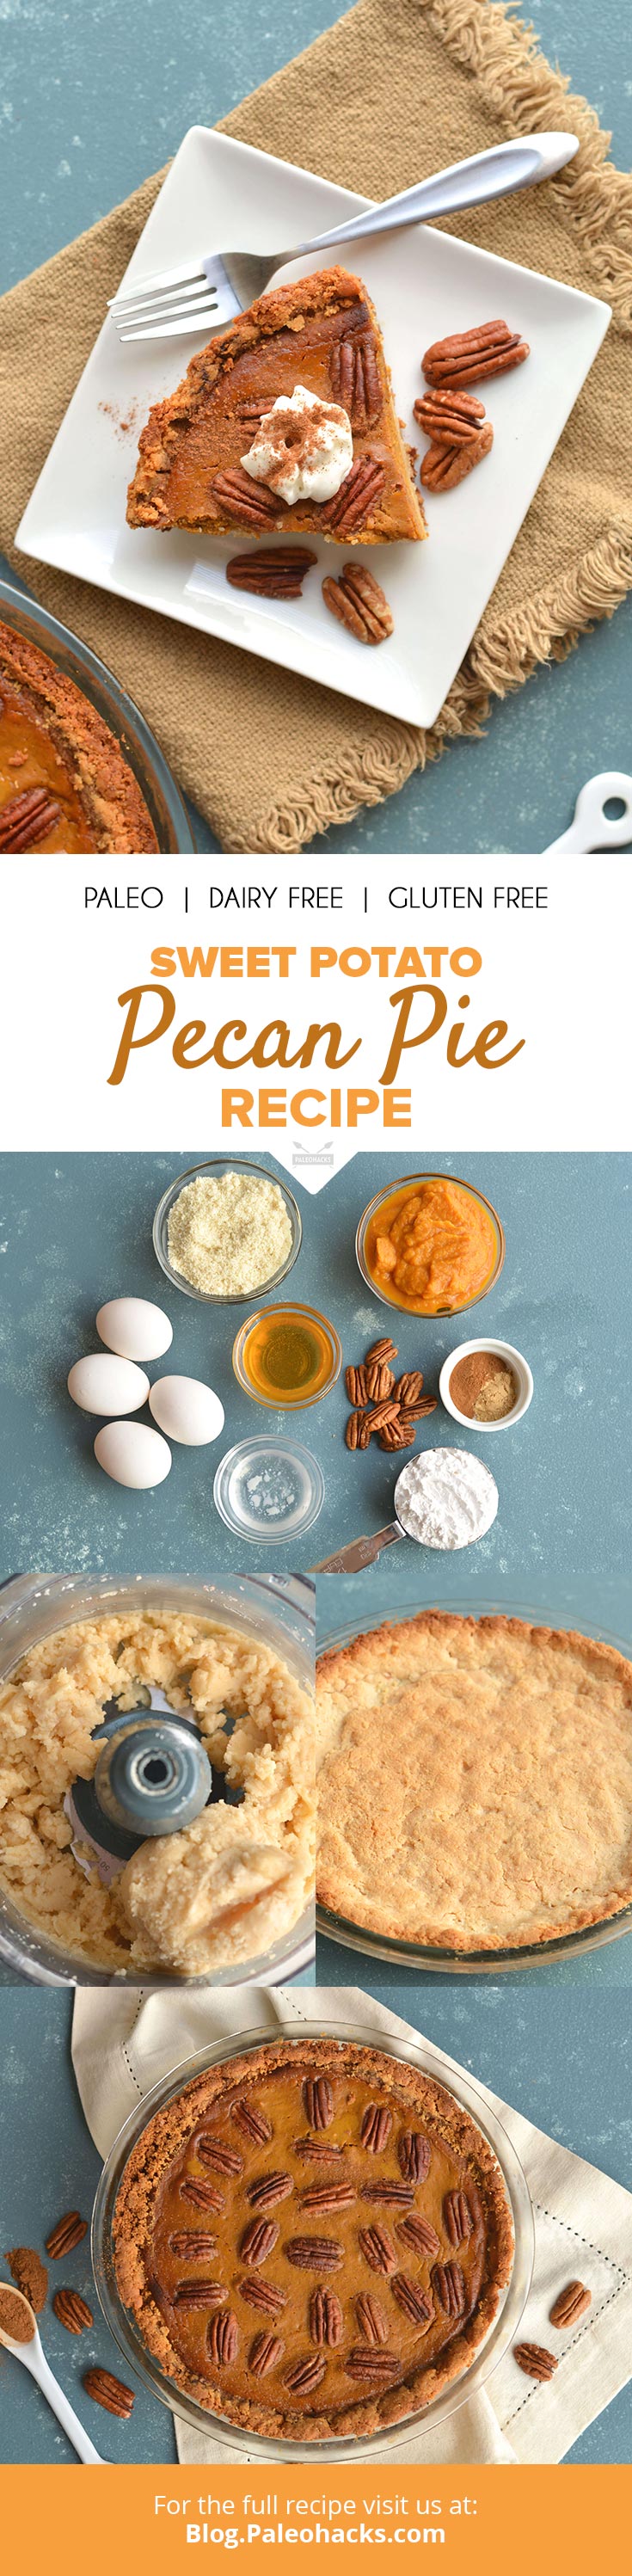 This homemade pecan pie has a creamy sweet potato filling and a flaky crust that crumbles in your mouth!